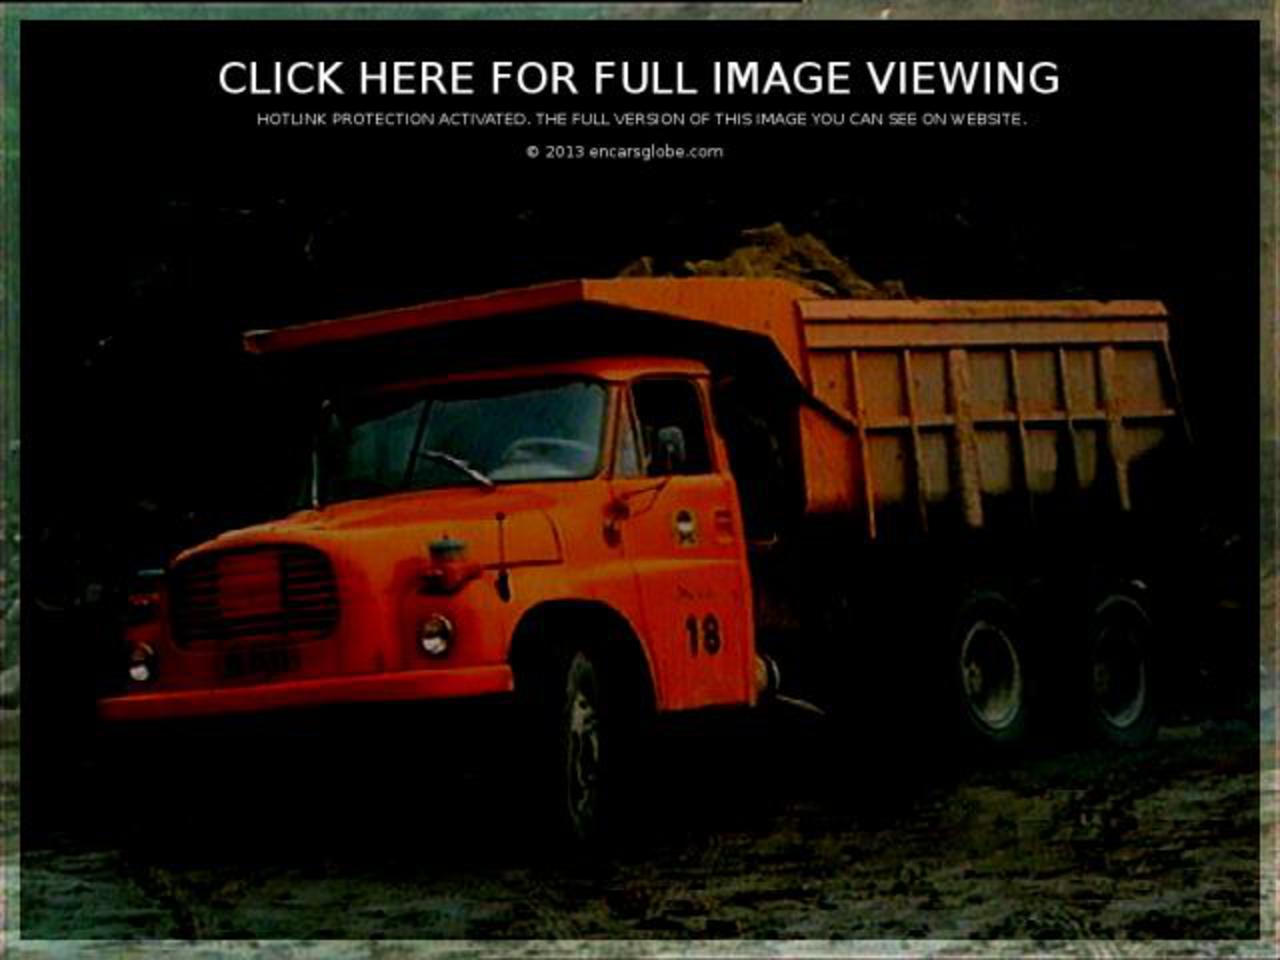 Tatra 148 S1 Photo Gallery: Photo #01 out of 12, Image Size - 640 ...